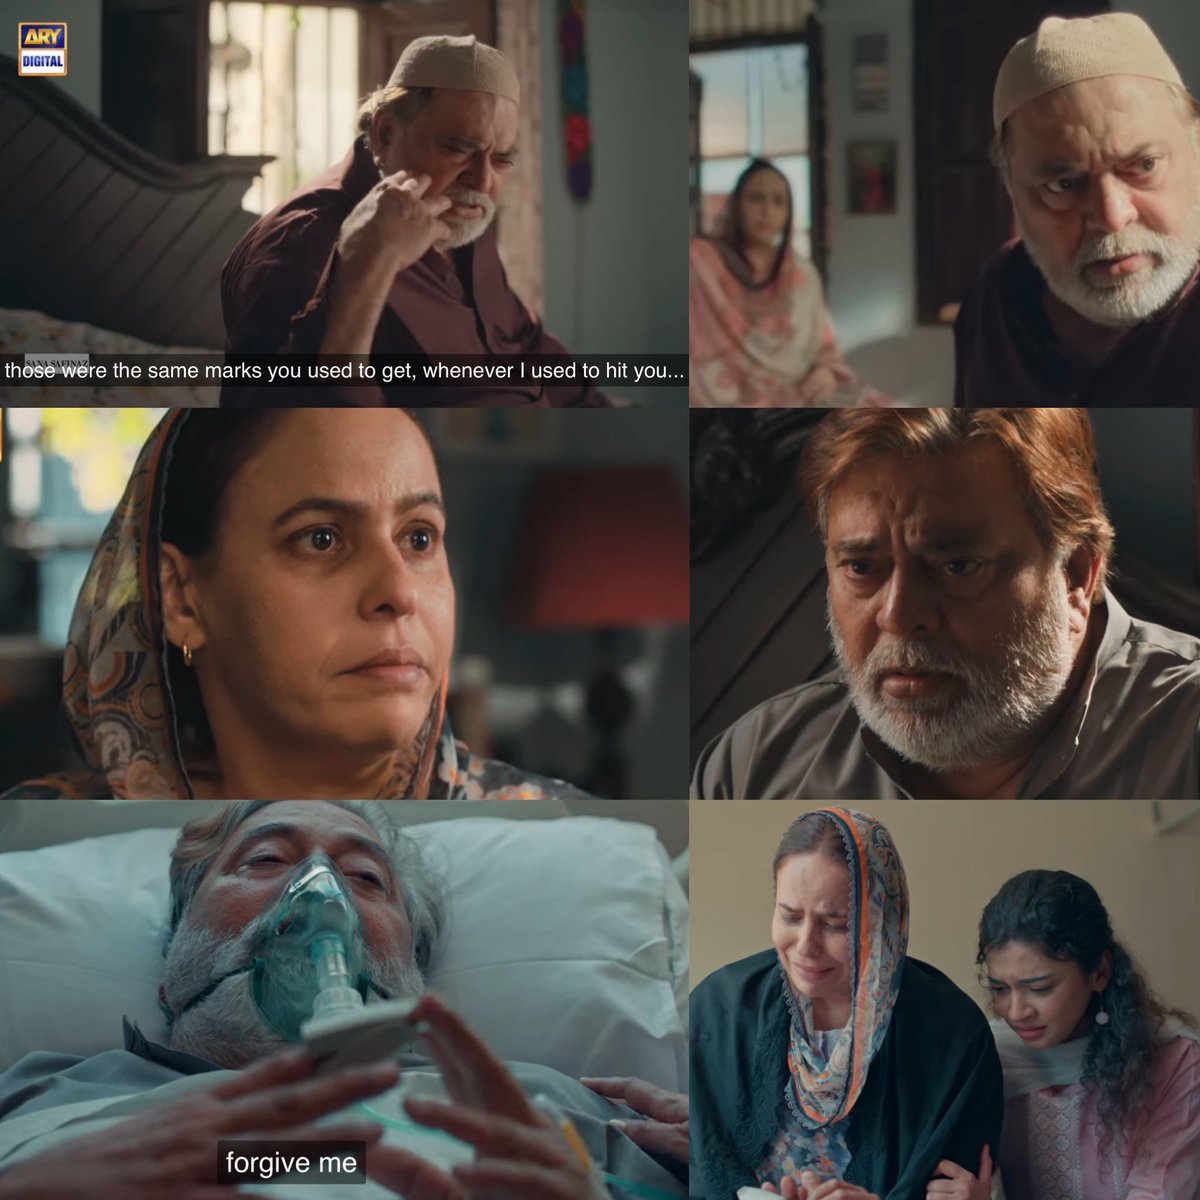 For 2 weeks, #ShabbirJan & #ZainabQayyum’s performances in #BurnsRoadKayRomeoJuliet have been exceptional. Passing on the generational toxicity, Yaqub’s wife blames Friya for Yaqub’s stress-related death (instead of herself or Kiran). Typical, realistic & tragic. #PakistaniDramas